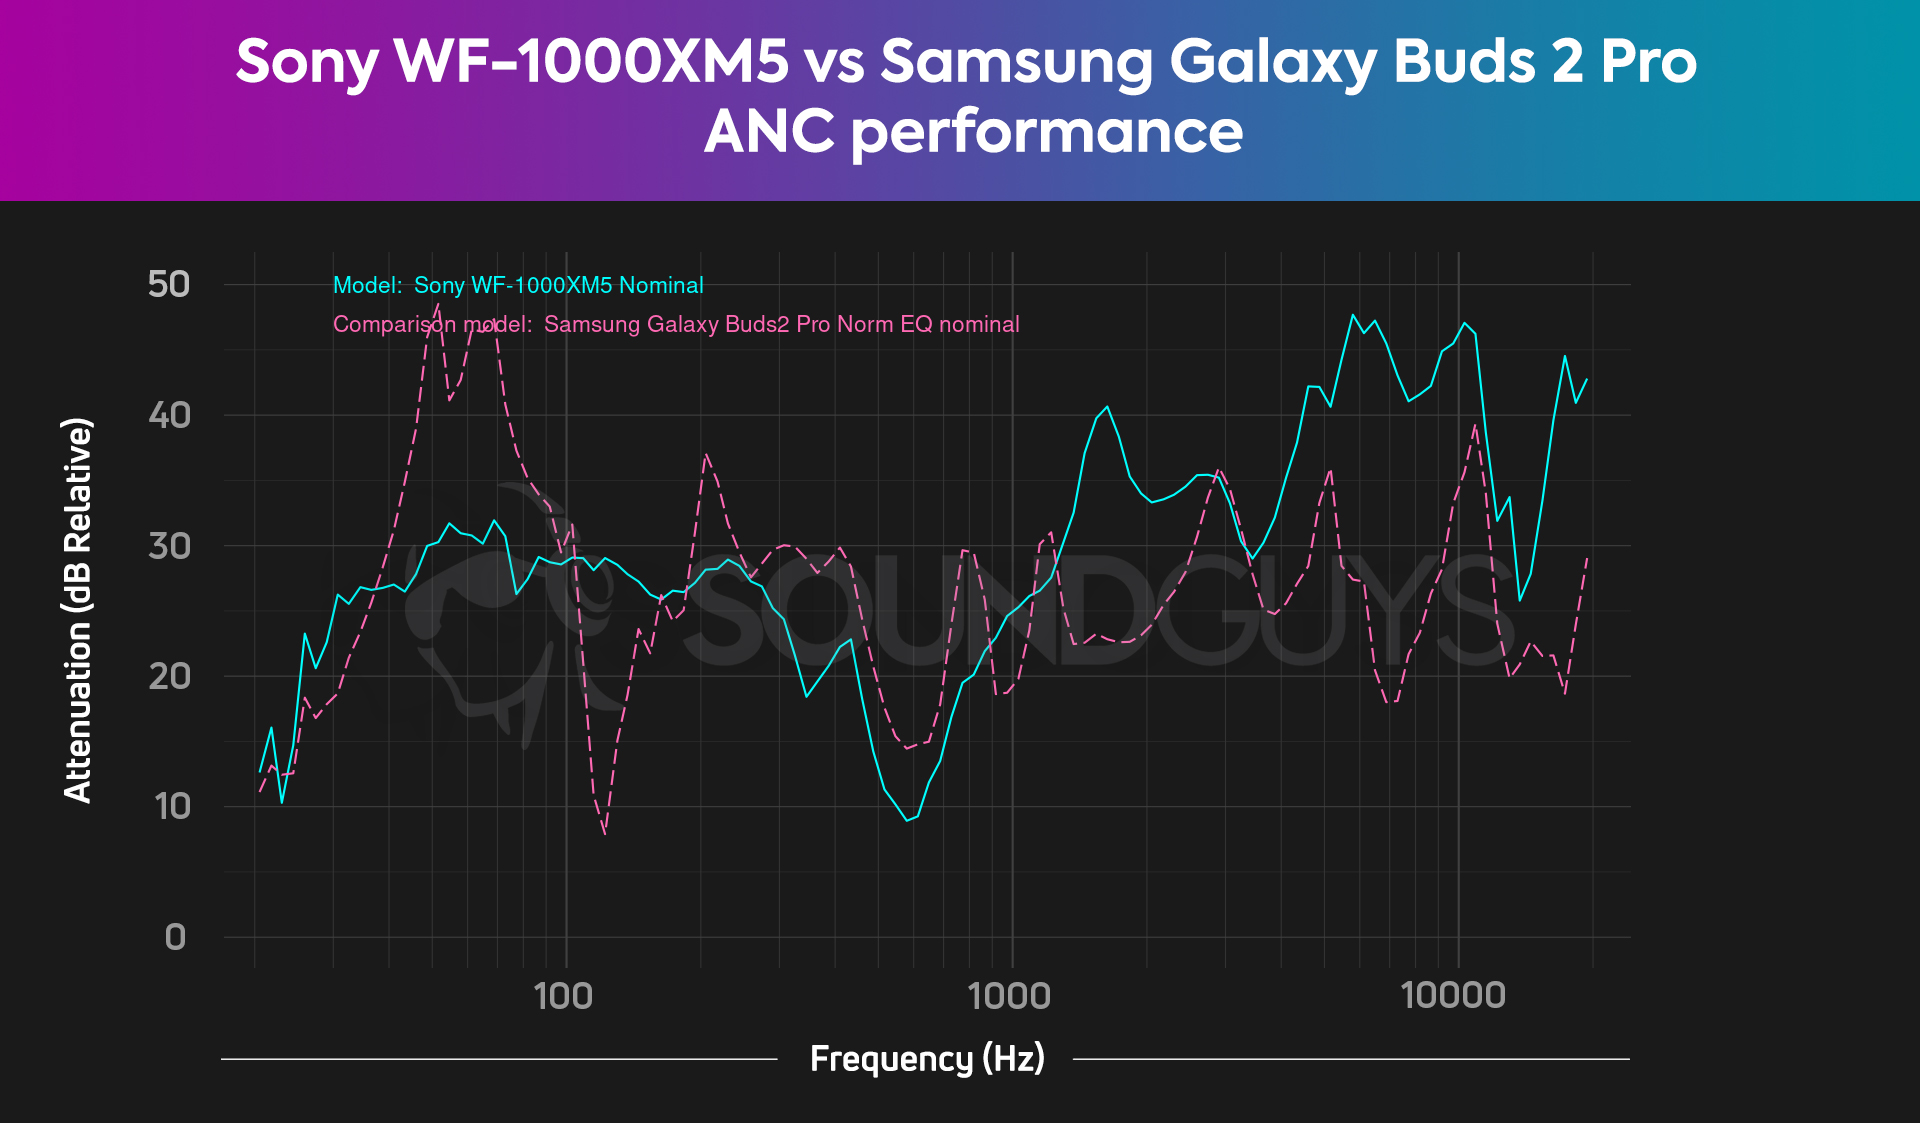 A chart compares the overall combined isolation and active noise canceling performances of the Sony WF-1000XM5 and Samsung Galaxy Buds 2 Pro.